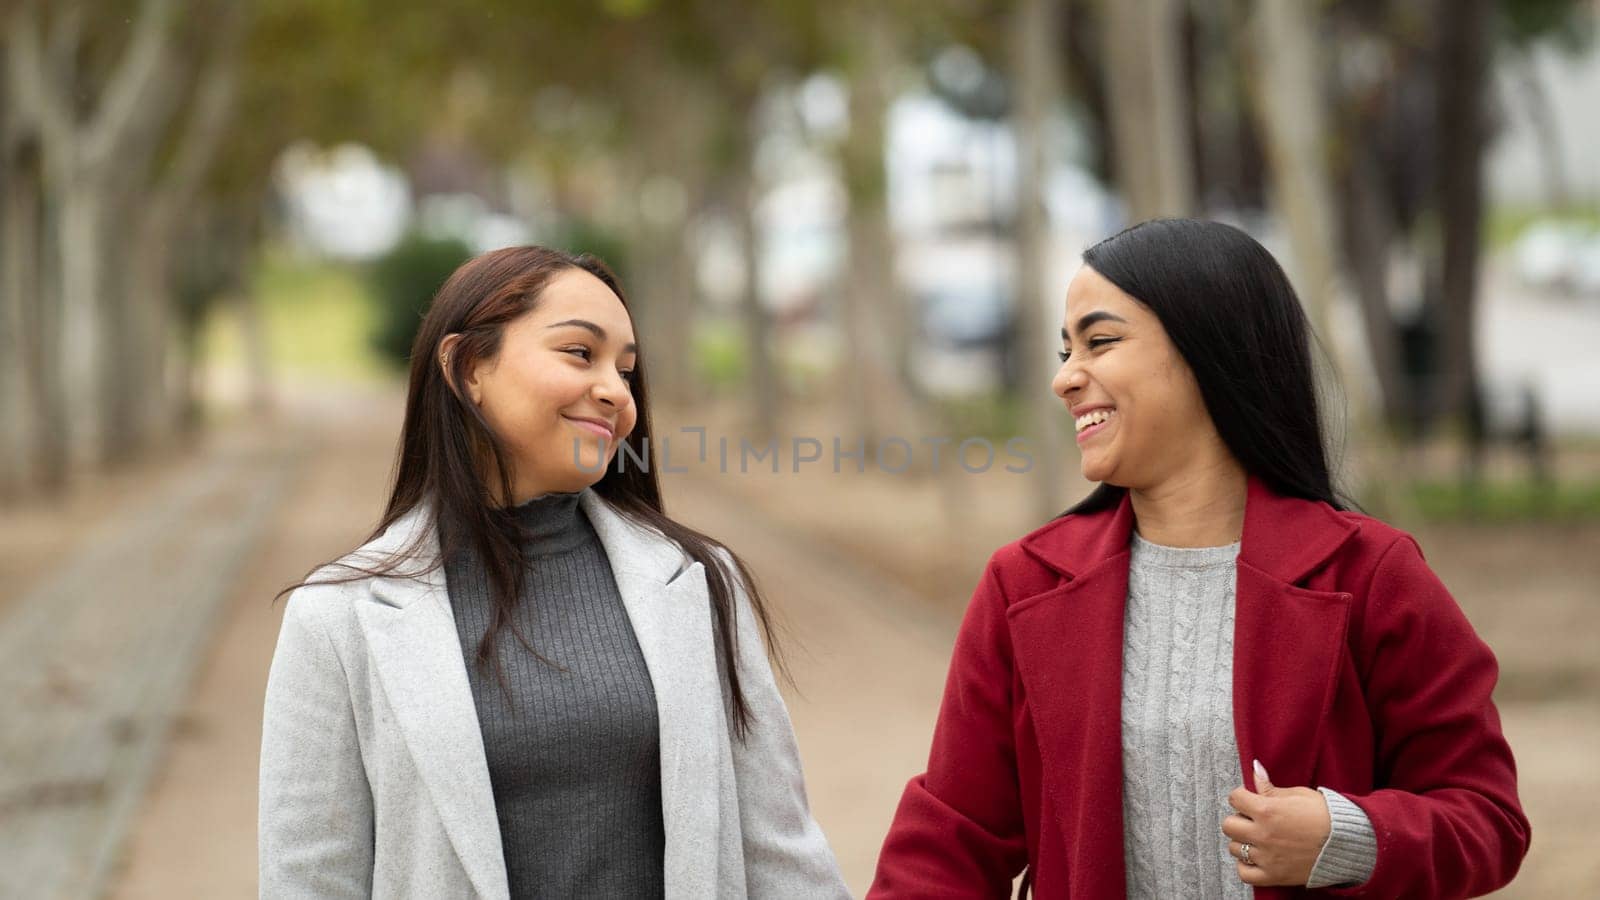 Lesbian couple smiling and looking at each other in a park by papatonic